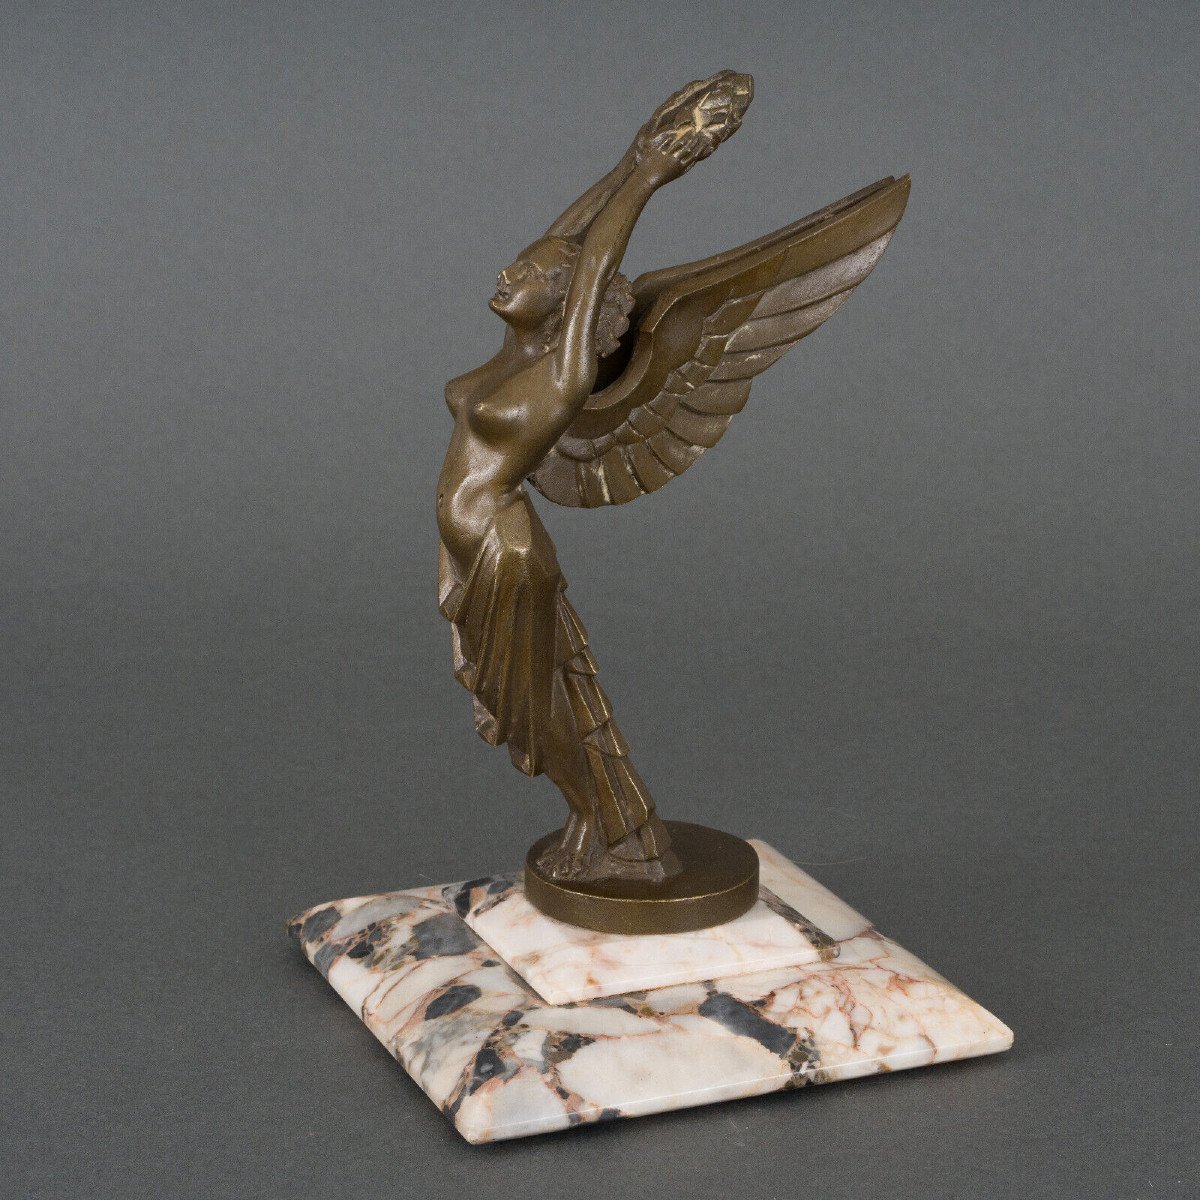 La Gloire Mascot By H. Molins 1930 Bronze With Brown Patina Marble Base